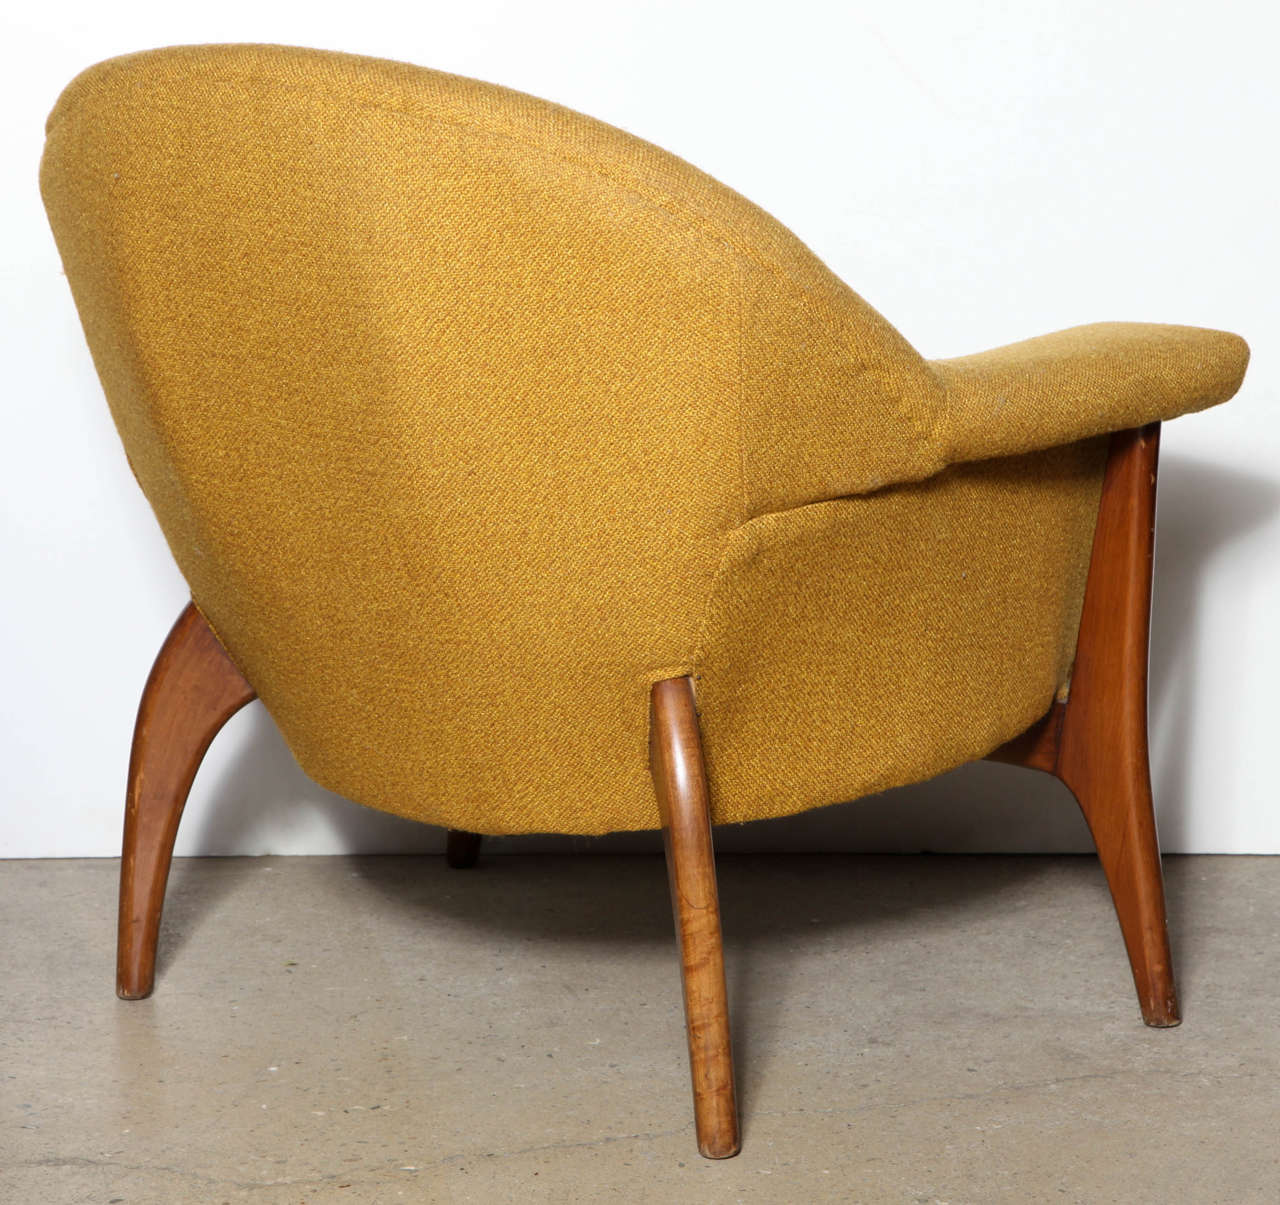 Fabric Adrian Pearsall for Craft Associates Lounge Chair